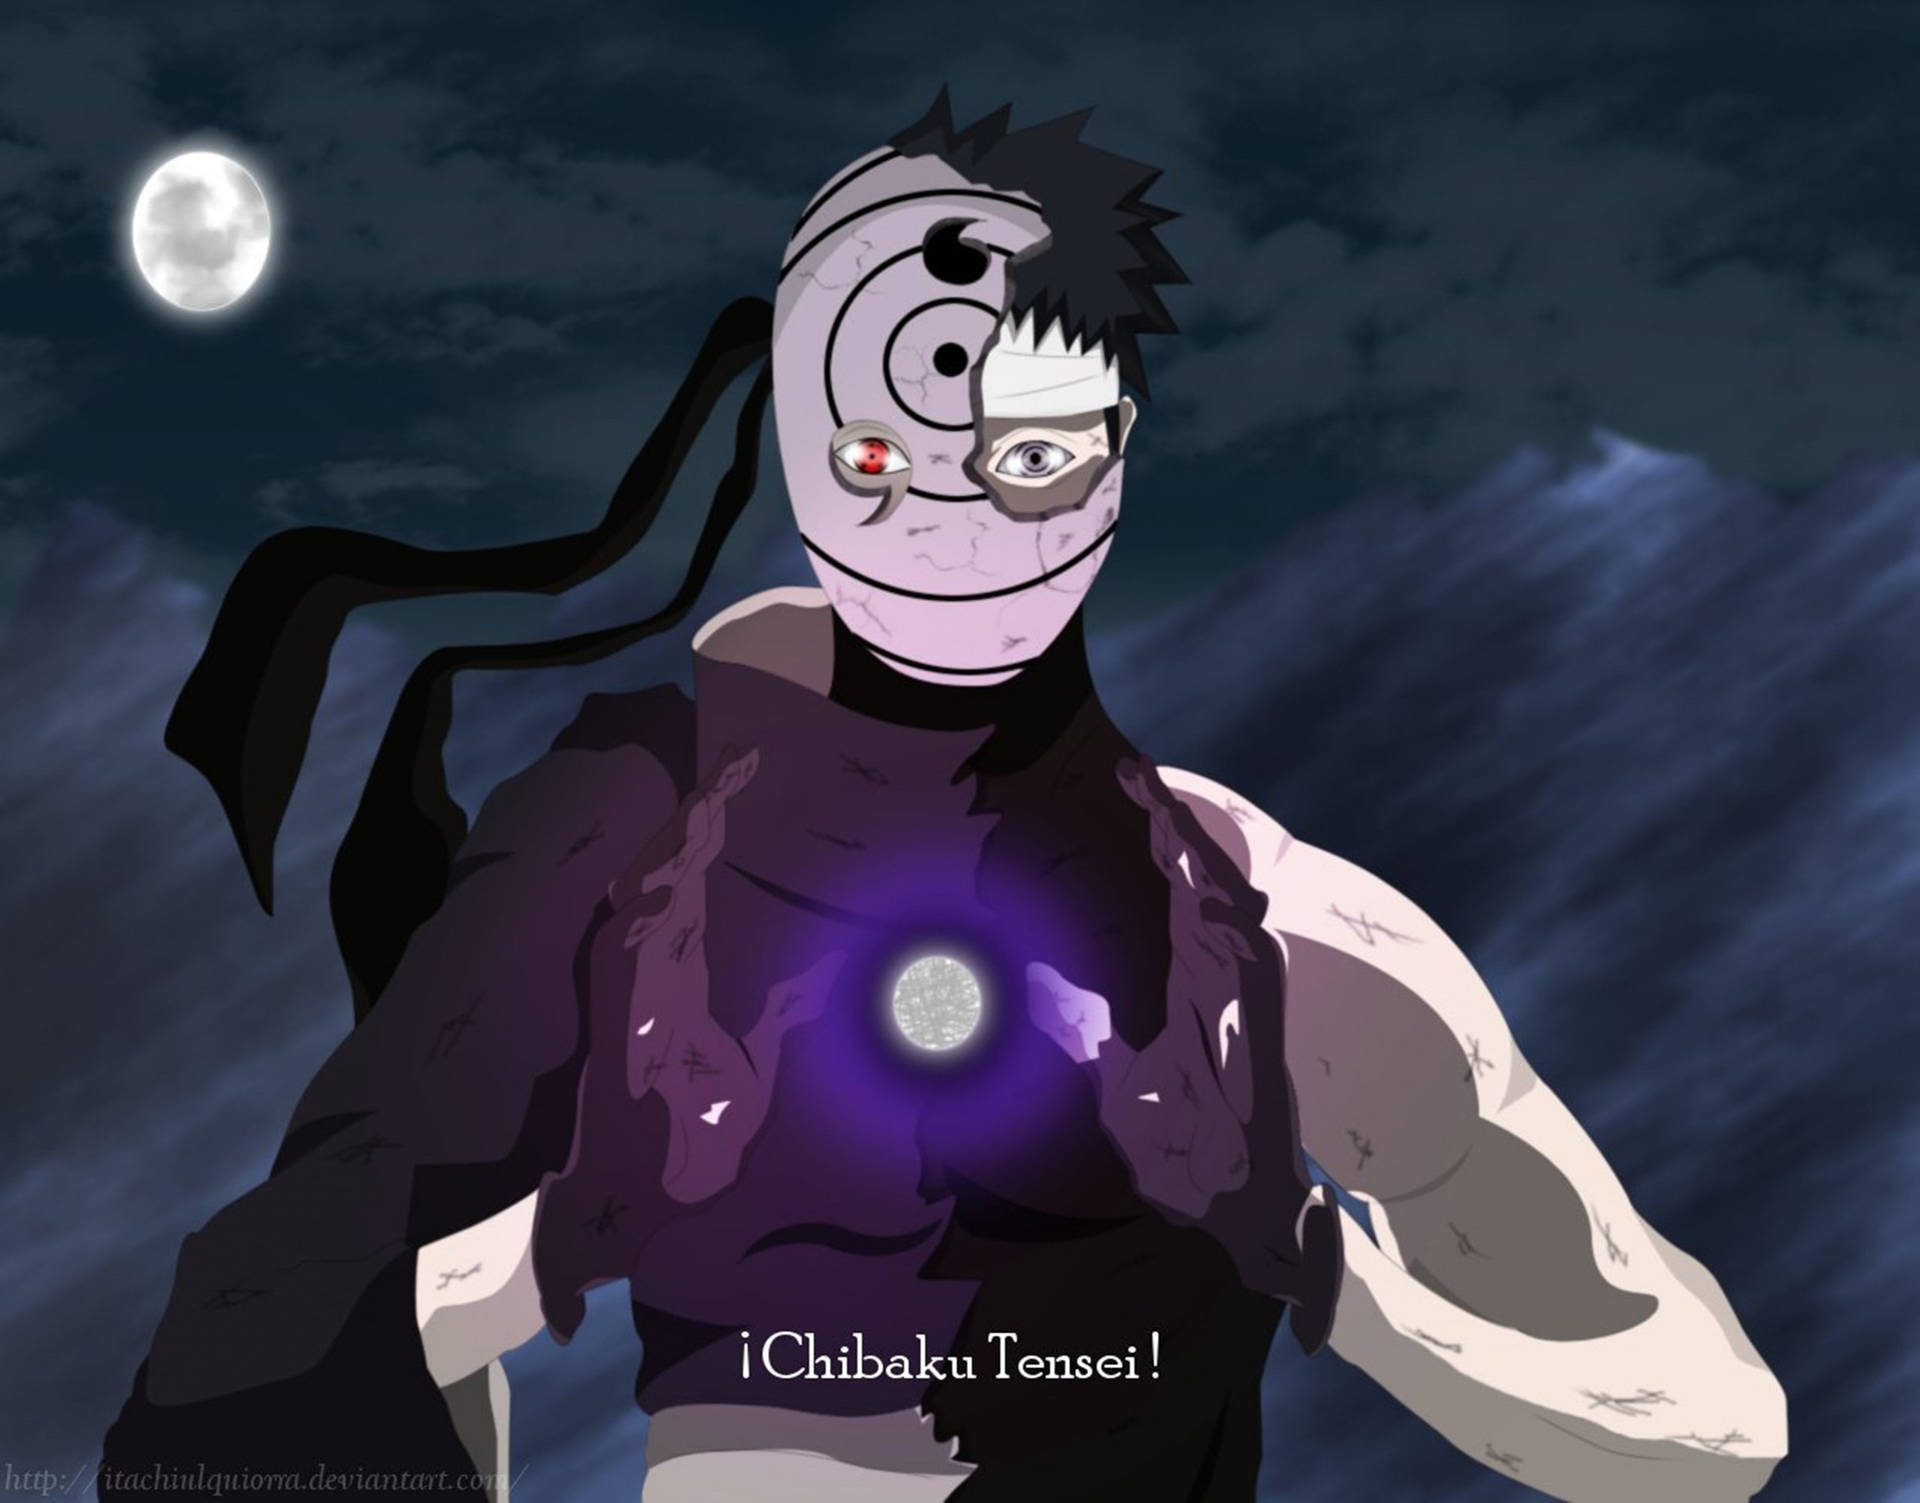 Free Obito Wallpaper Downloads, [200+] Obito Wallpapers for FREE |  